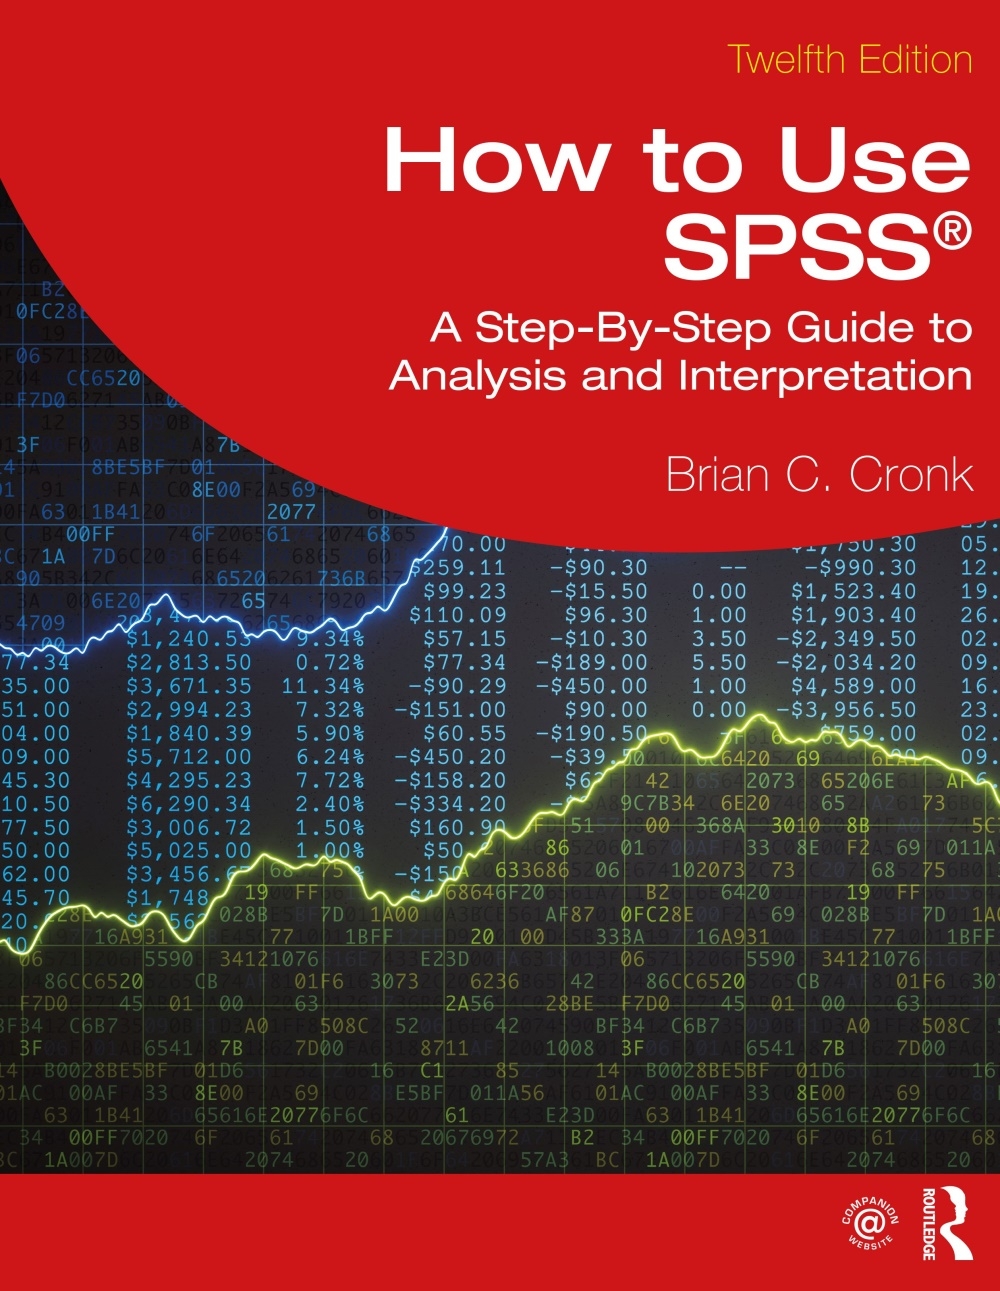 How to Use Spss(r): A Step-By-Step Guide to Analysis and Interpretation